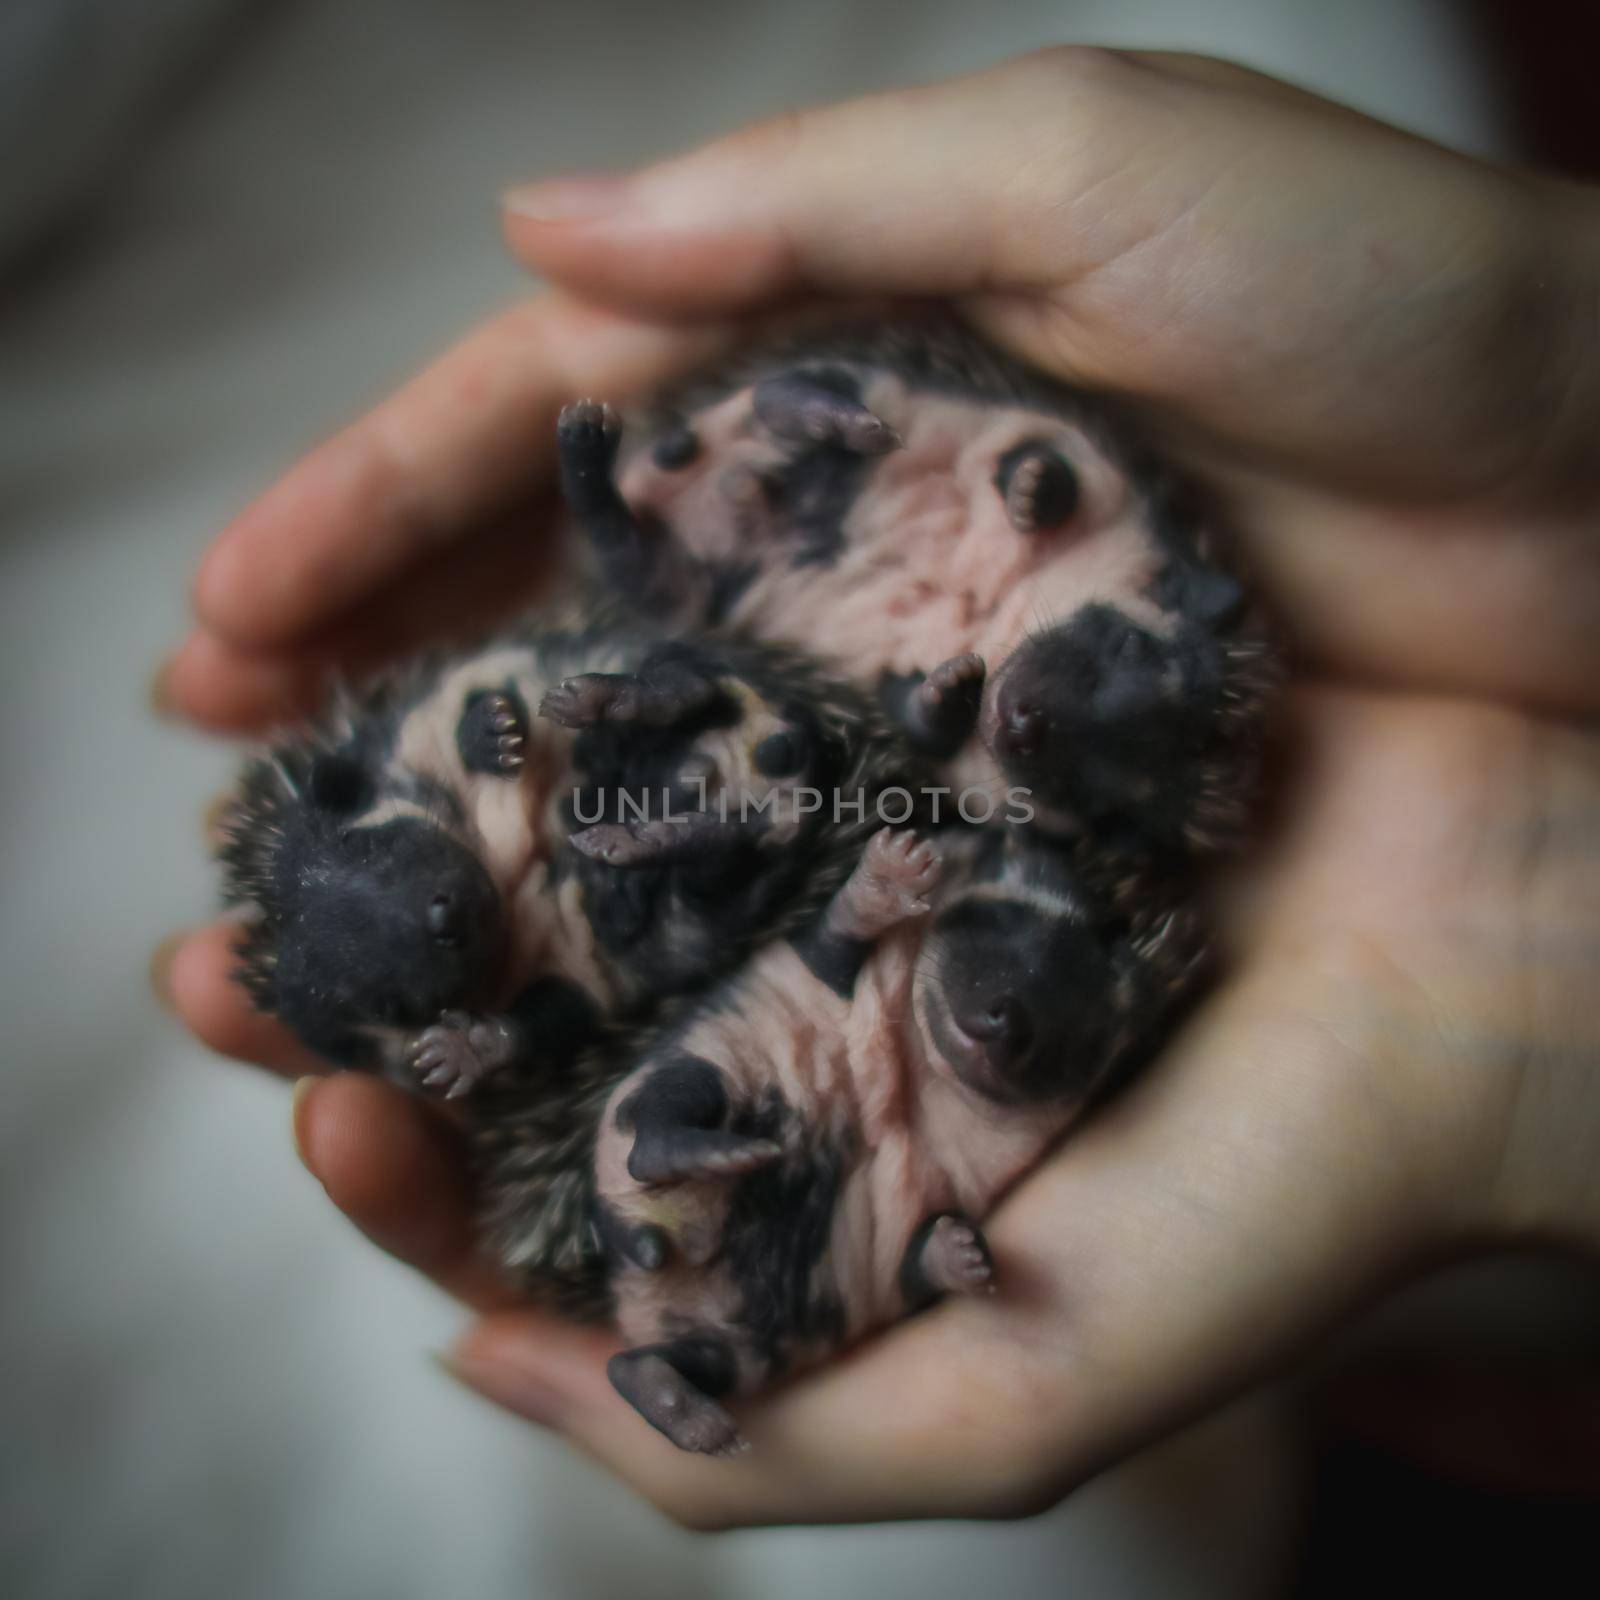 Domesticated hedgehog babies or African pygmy in hands by RosaJay